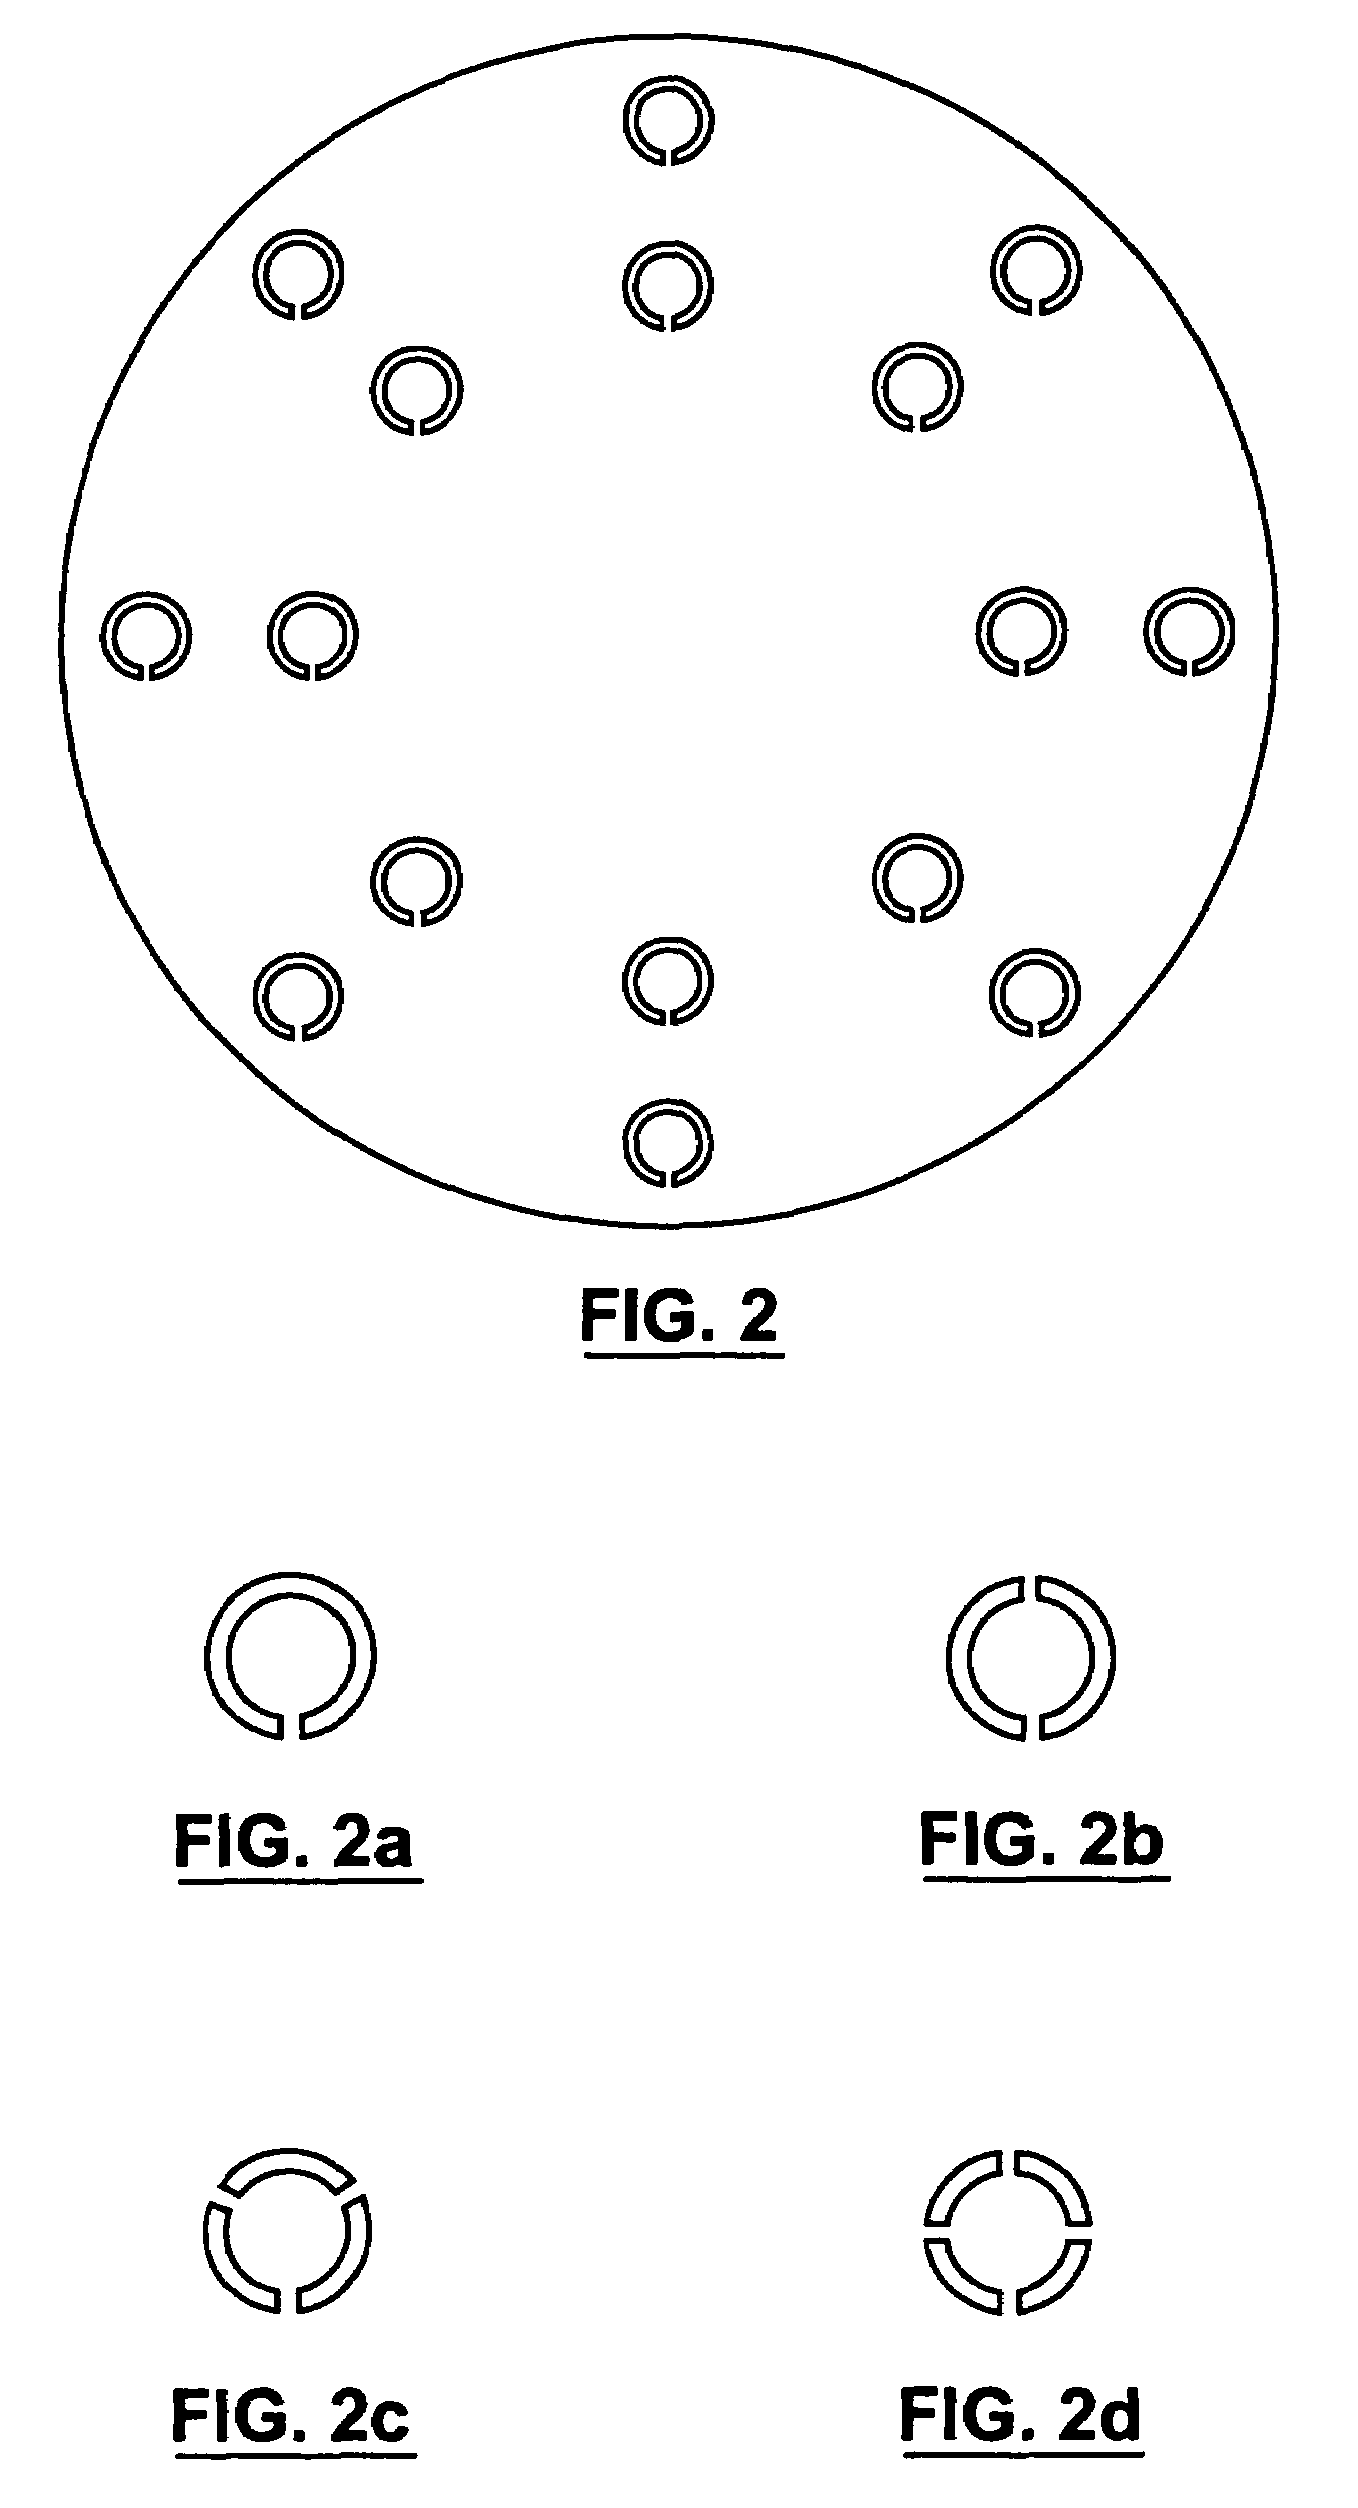 Supported biofilm apparatus and process